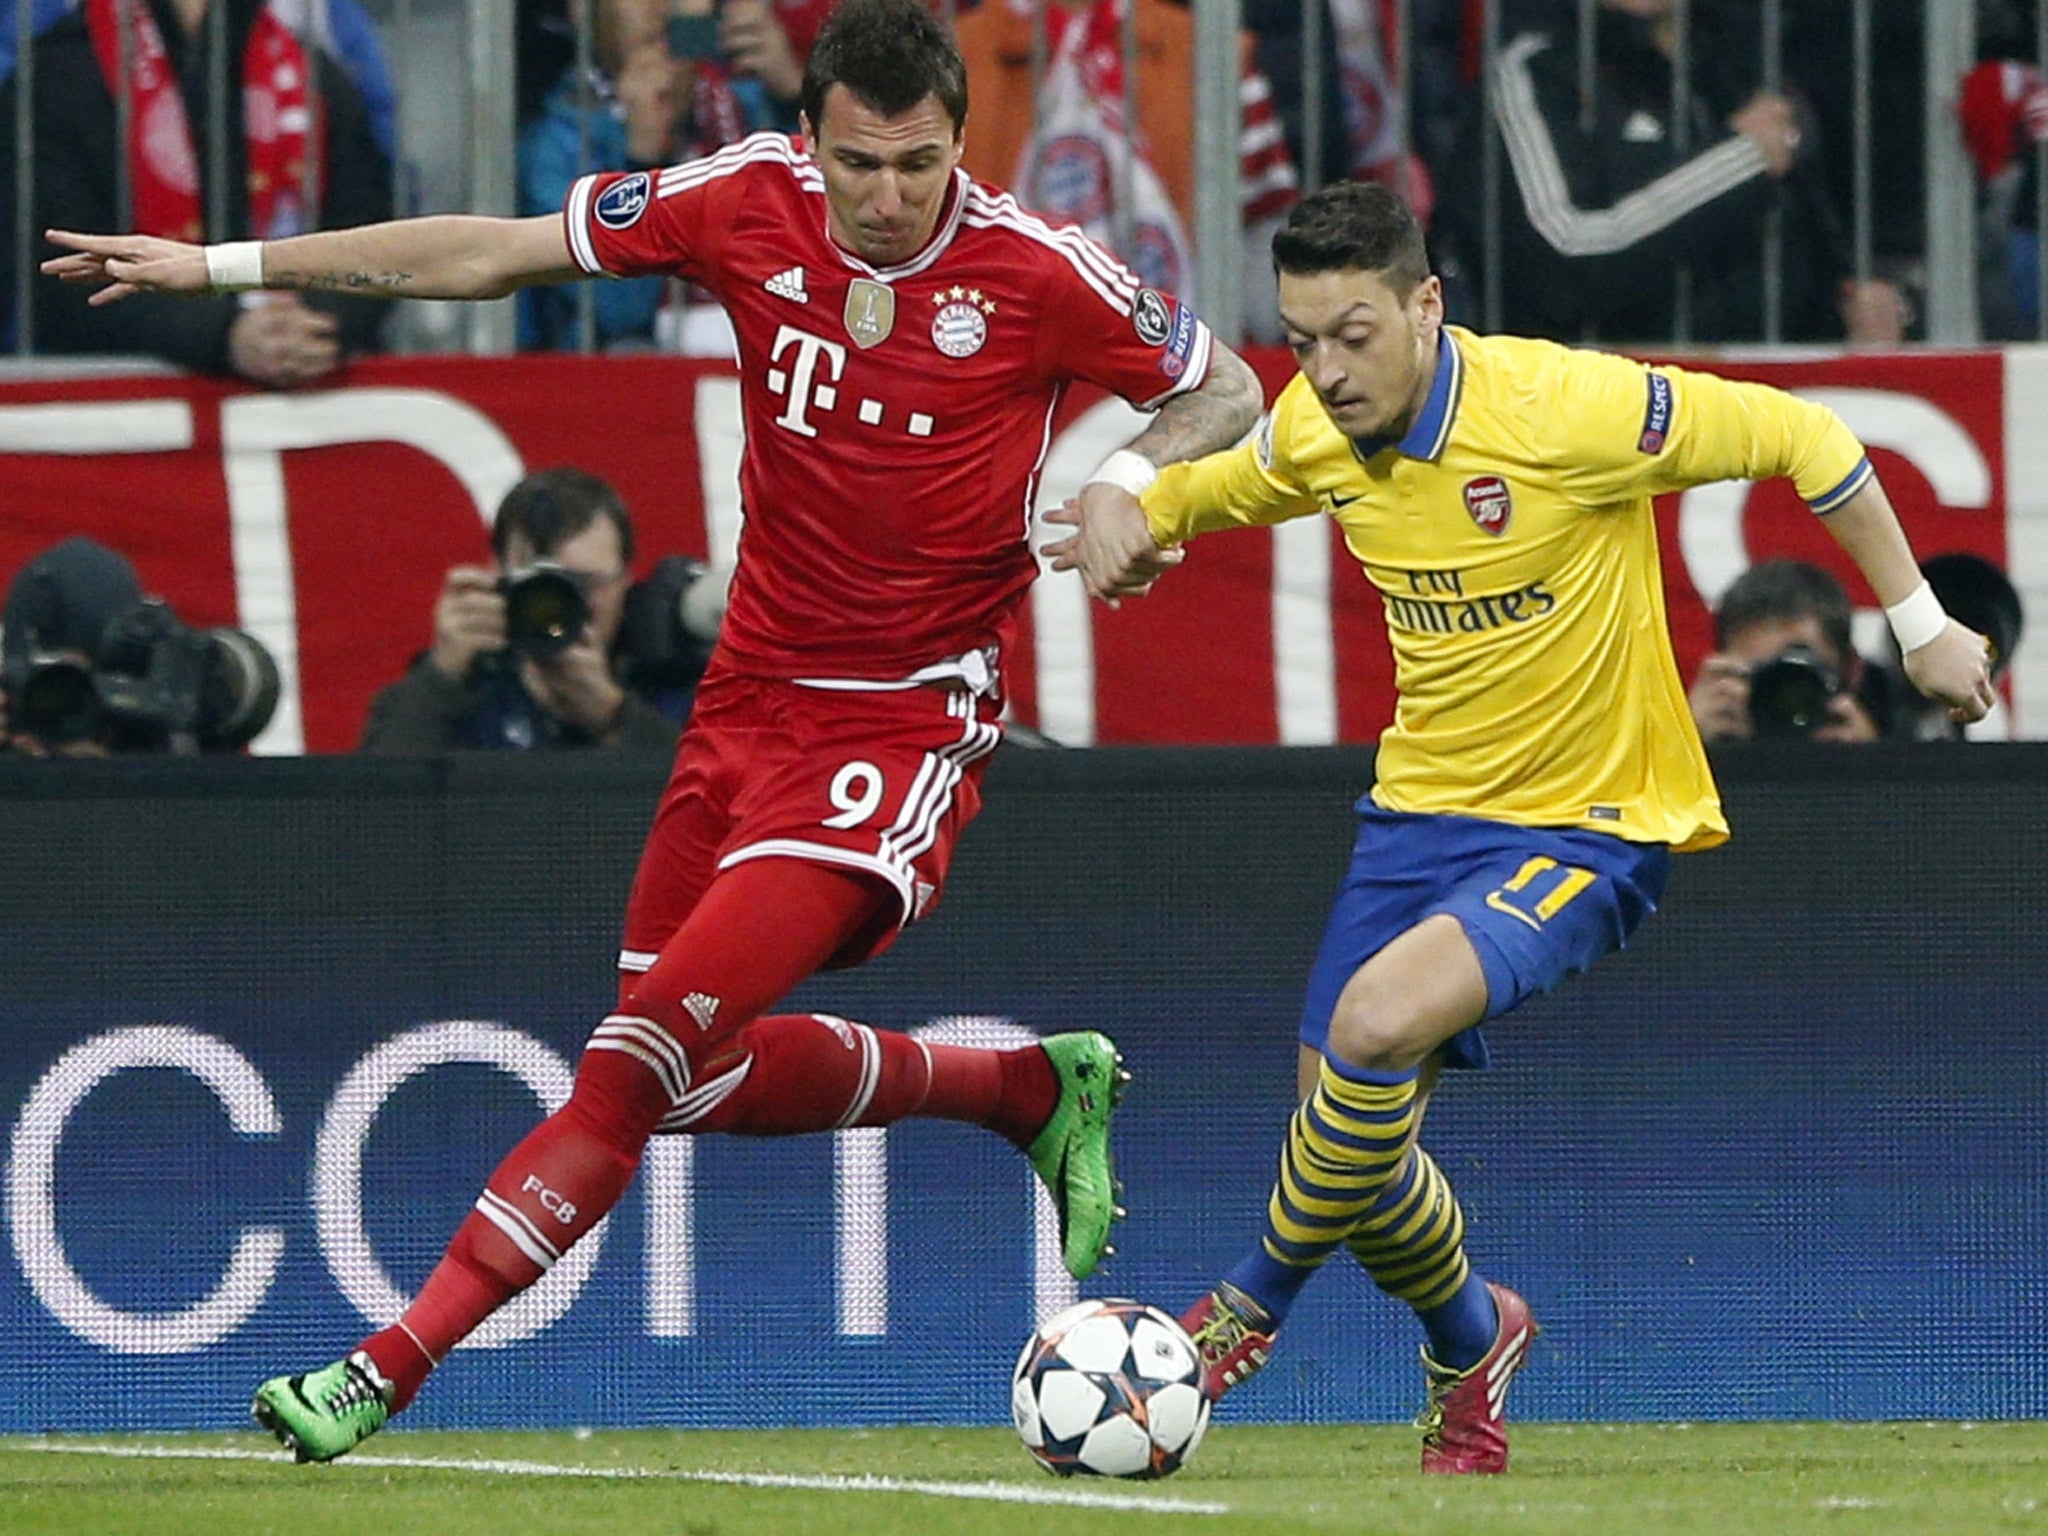 Mesut Özil (right) was injured against Bayern on Tuesday night